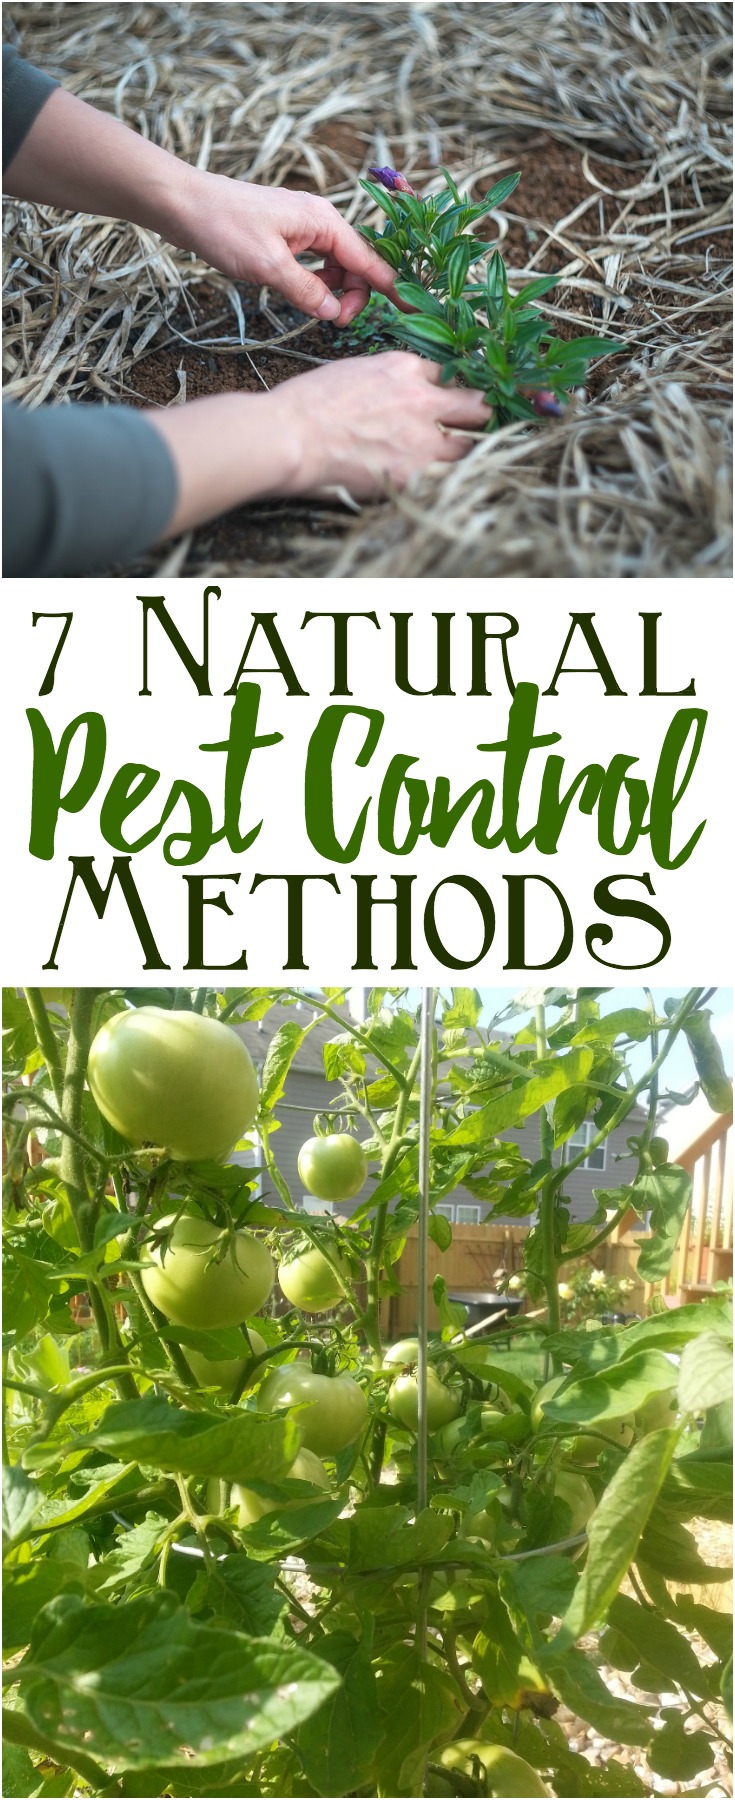 Try these natural pest control methods for garden pest control! Natural sprays, soil fertility and companion planting can help reduce or eliminate unwanted pests in your garden and help your garden thrive.